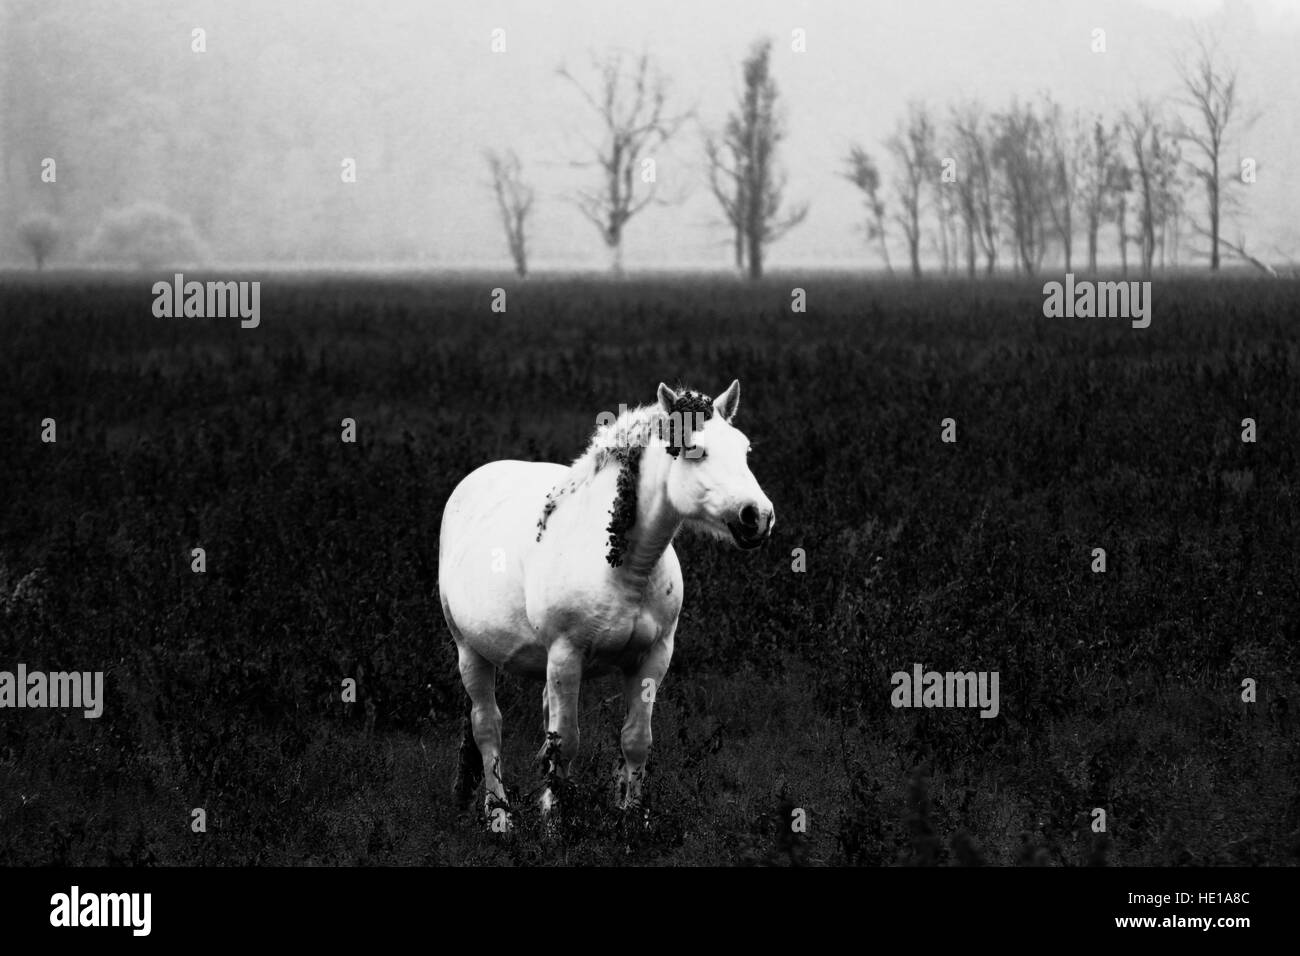 White horse in black and white landscape. Moody atmosphere Stock Photo